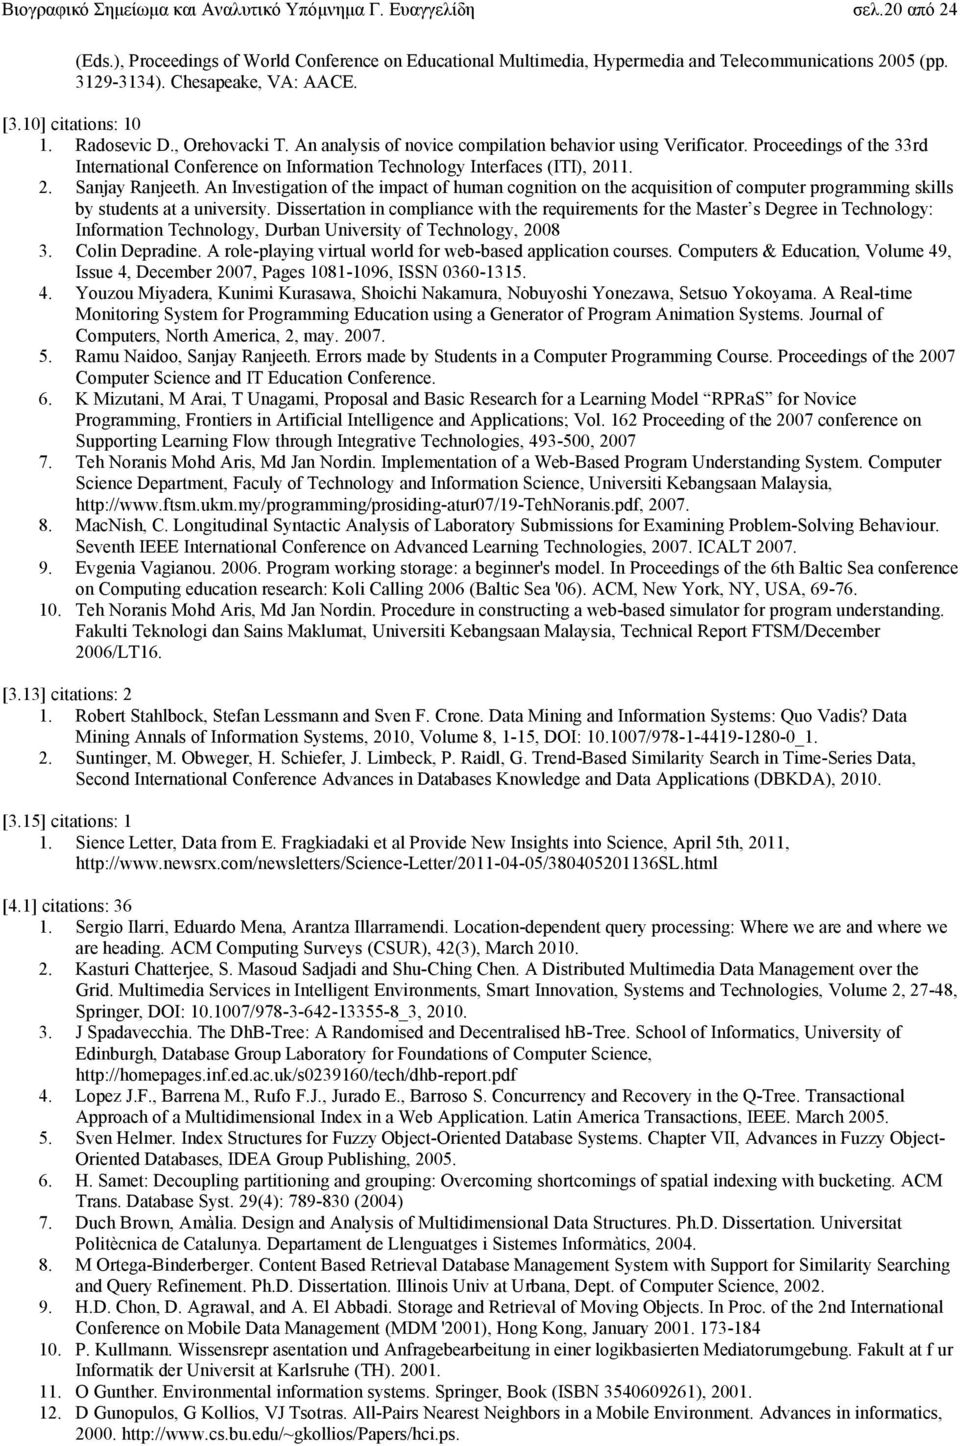 Proceedings of the 33rd International Conference on Information Technology Interfaces (ITI), 2011. 2. Sanjay Ranjeeth.